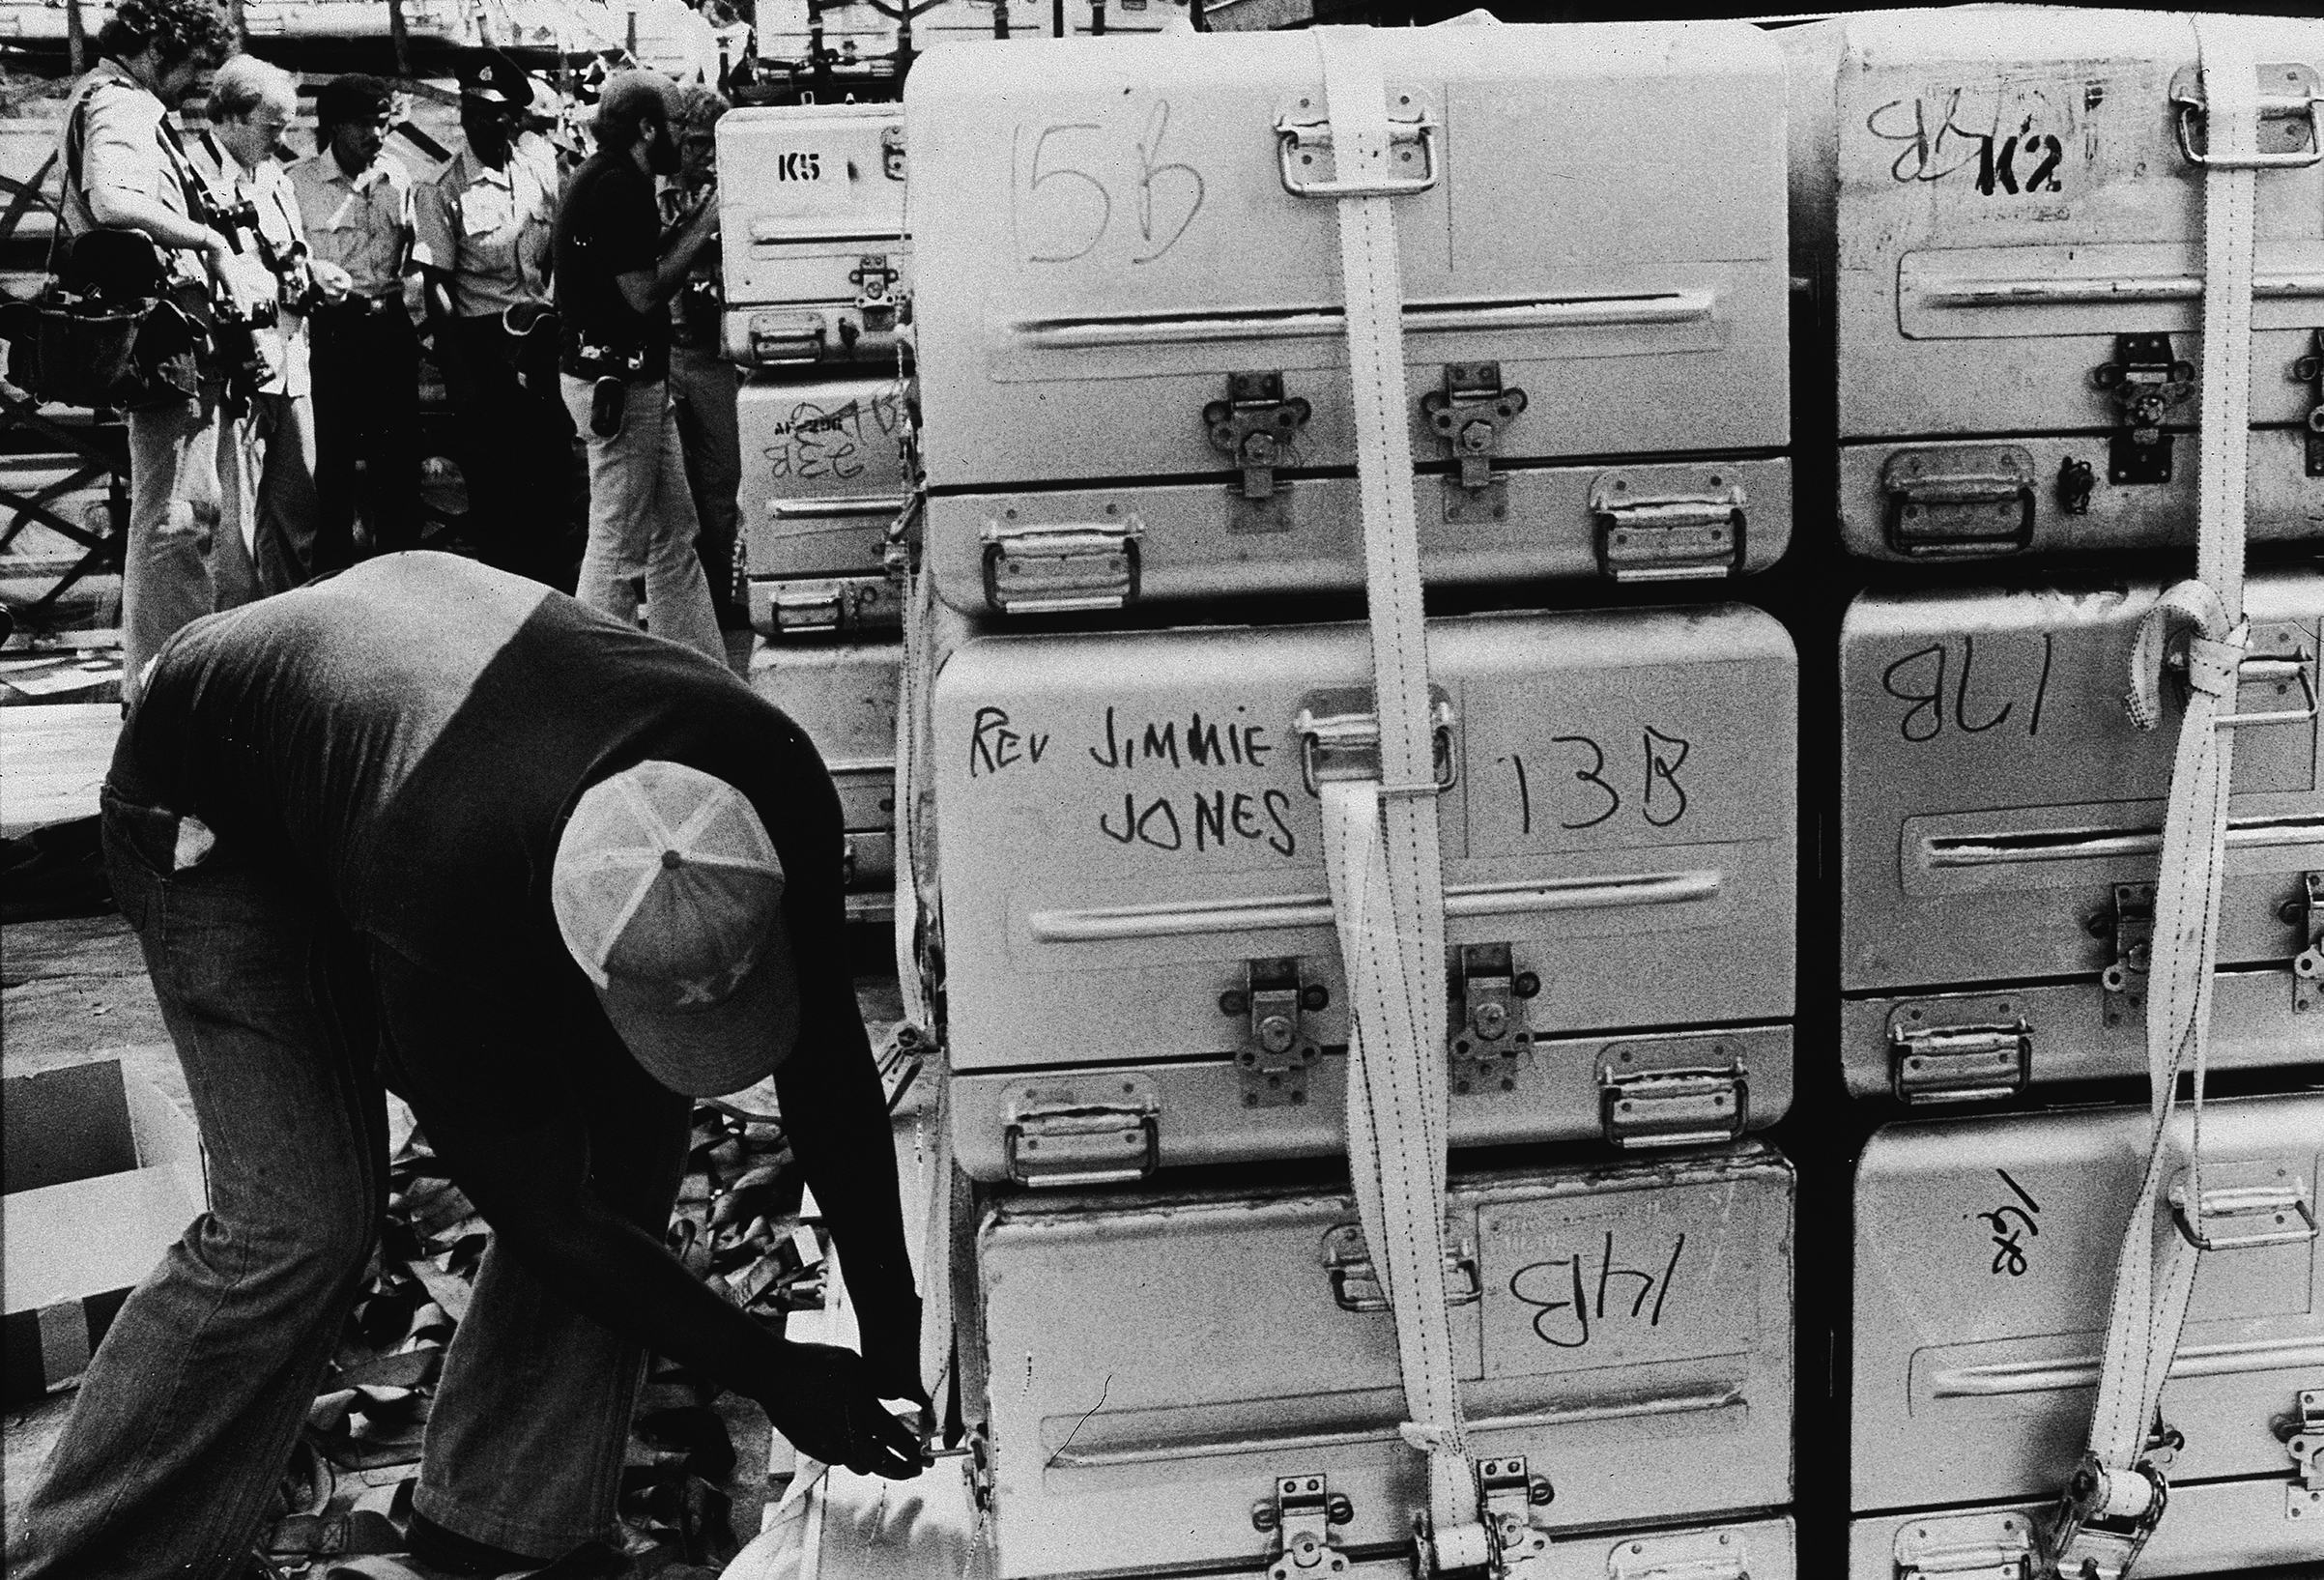 An unidentified man a strap onto a stack of aluminum coffins for shipment to the United States, following the more than 900 deaths in the mass suicide staged in Jonestown by members of the People's Temple and their leader, the Reverend Jim Jones, Georgetown, Guyana, Nov. 23, 1978. A group of photographers and police officers stand in the background. (New York Times Co.—Getty Images)